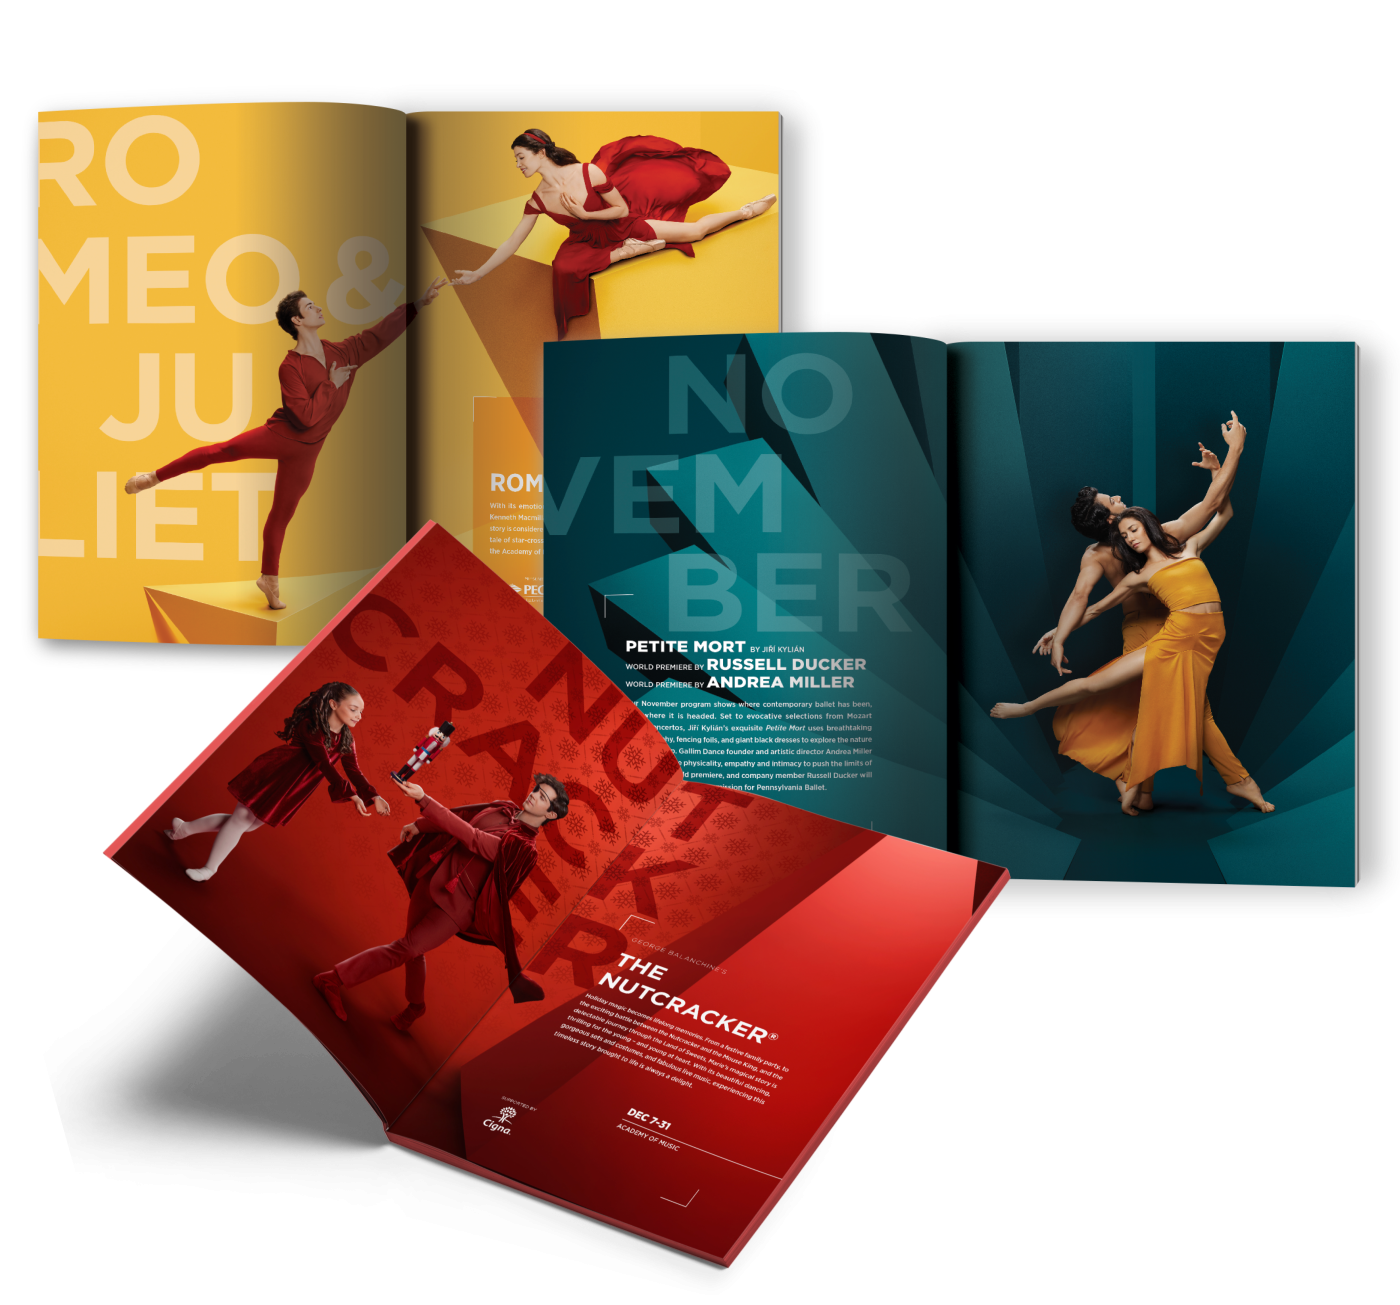 3 brochures for the Philadelphia Ballet featuring elements of the new creative direction that uses bold imagery and colors. Each brochure uses a different, vibrant color for the background to highlight the dancers such as gold, dark red, and turquoise.